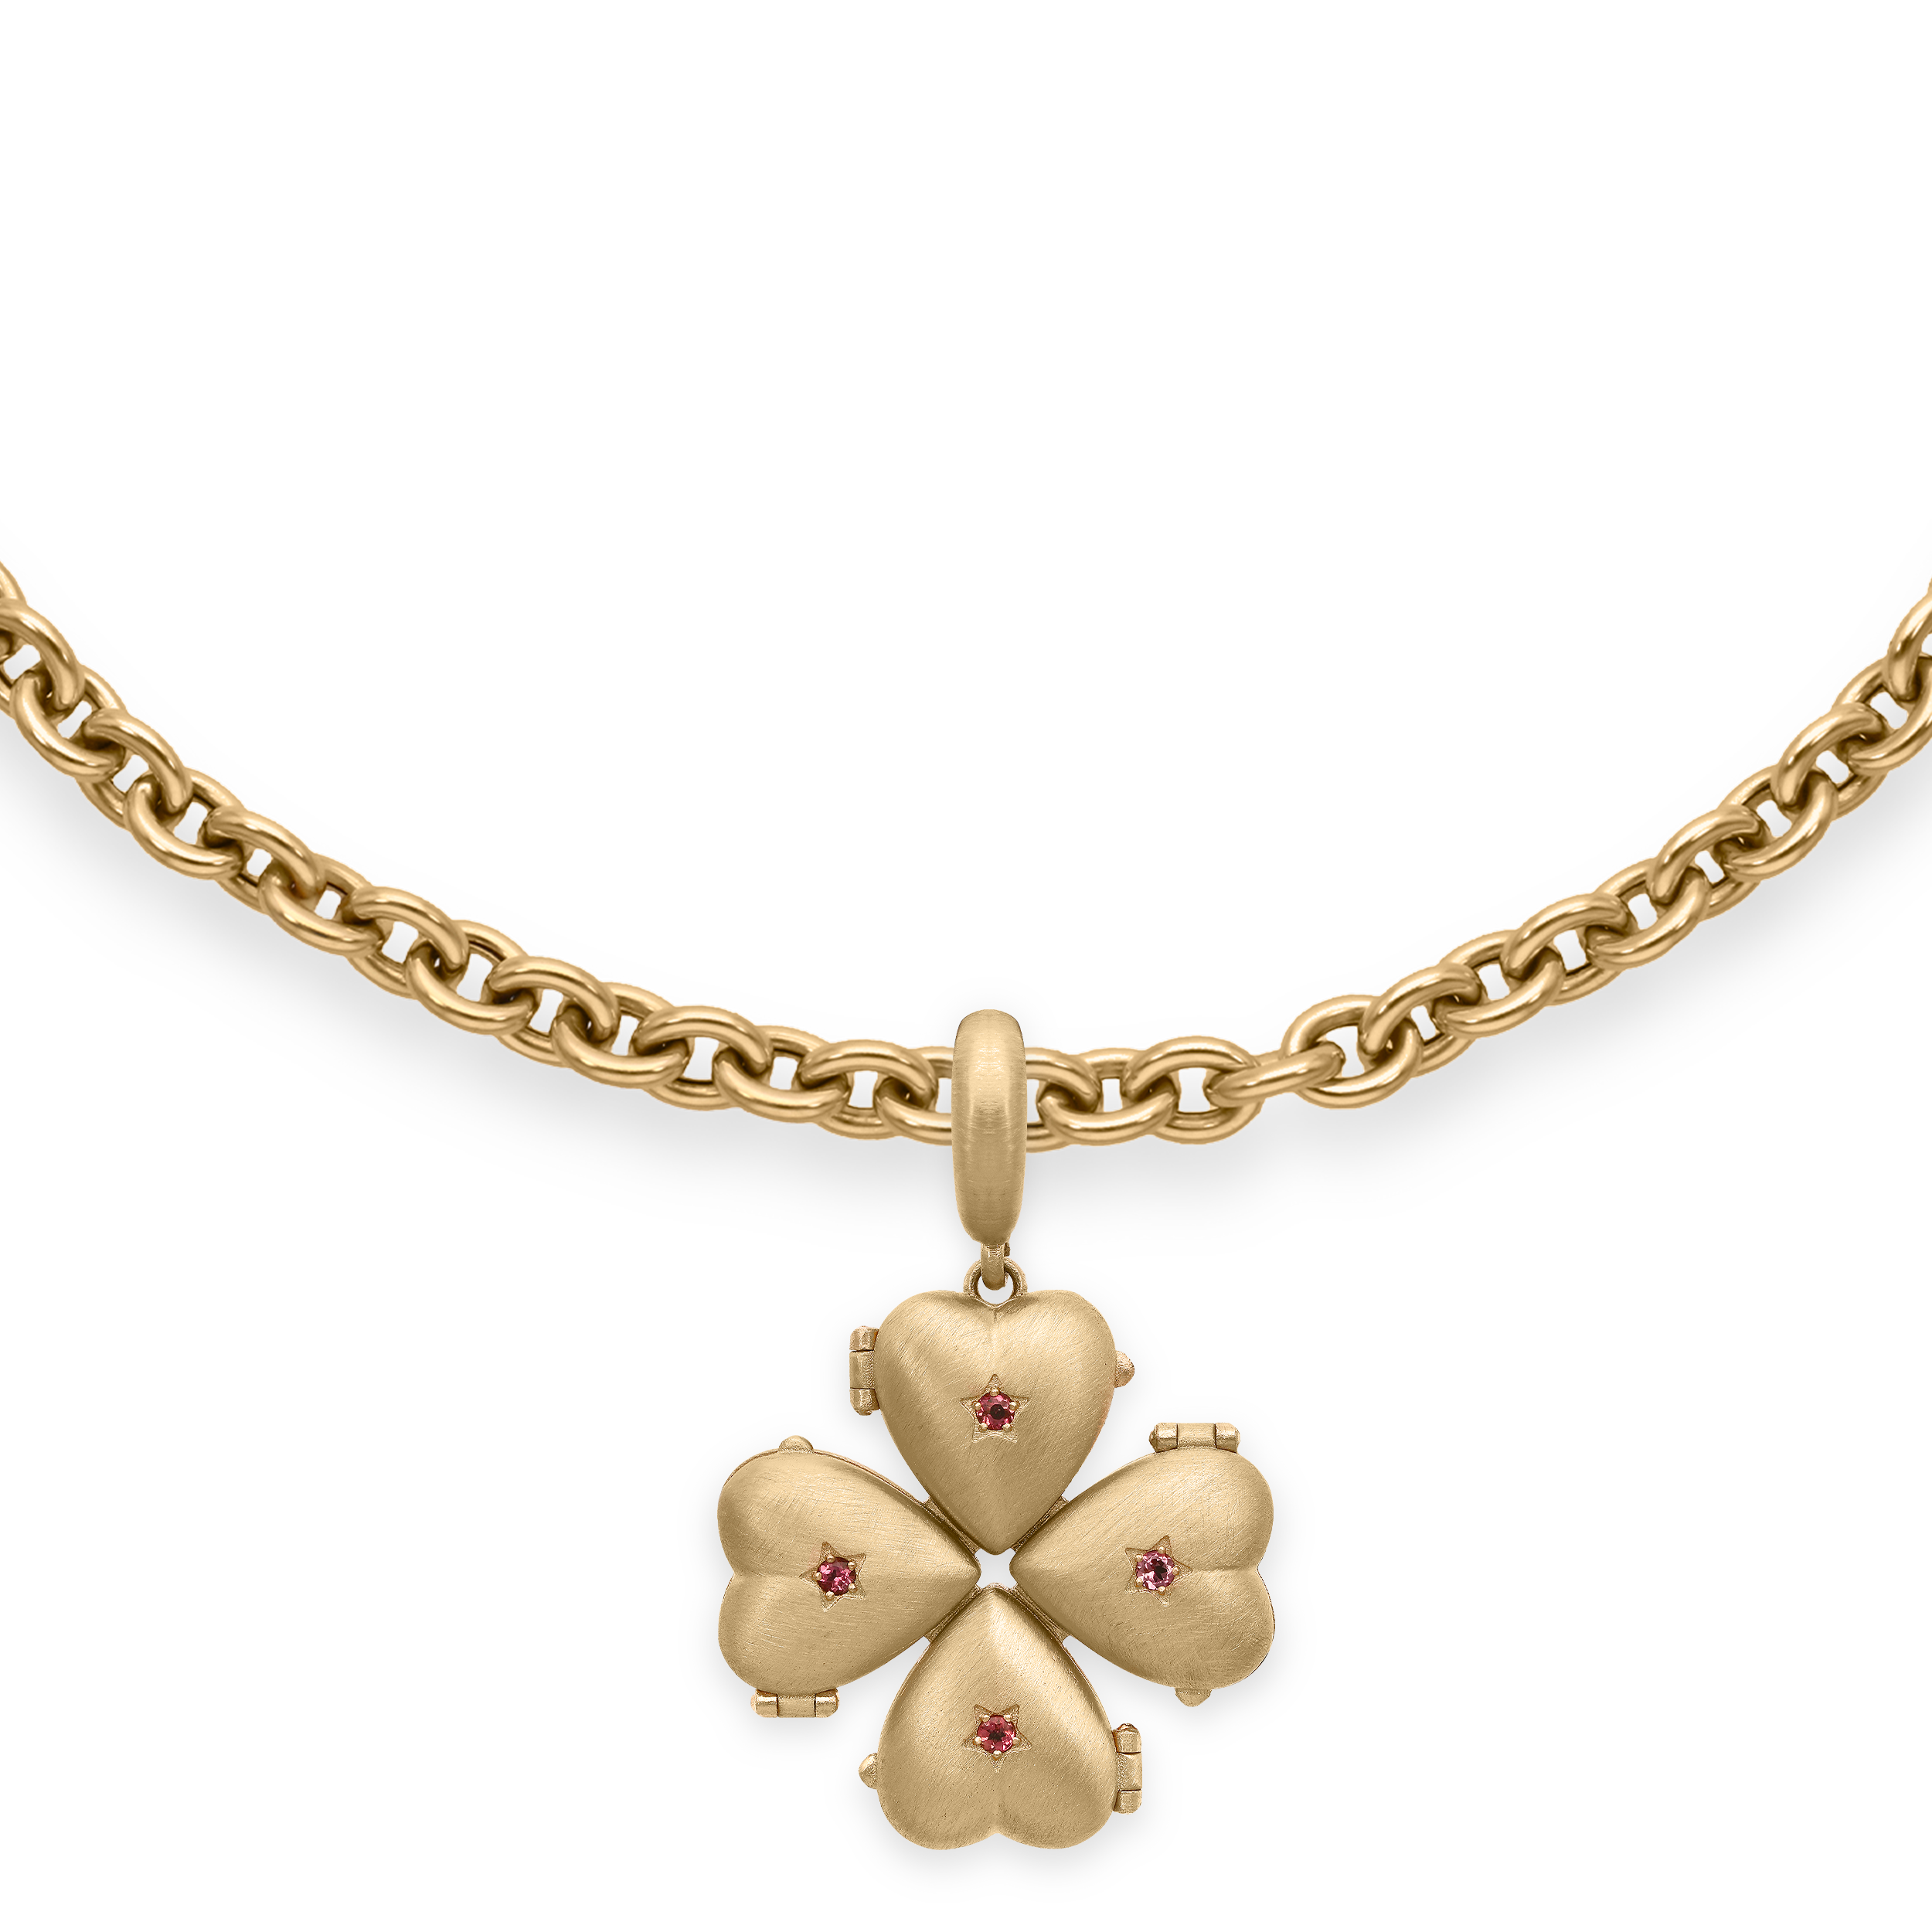 Bruno Brushed Yellow Gold and Tourmalines "Secret" Clover Pendant on Necklace